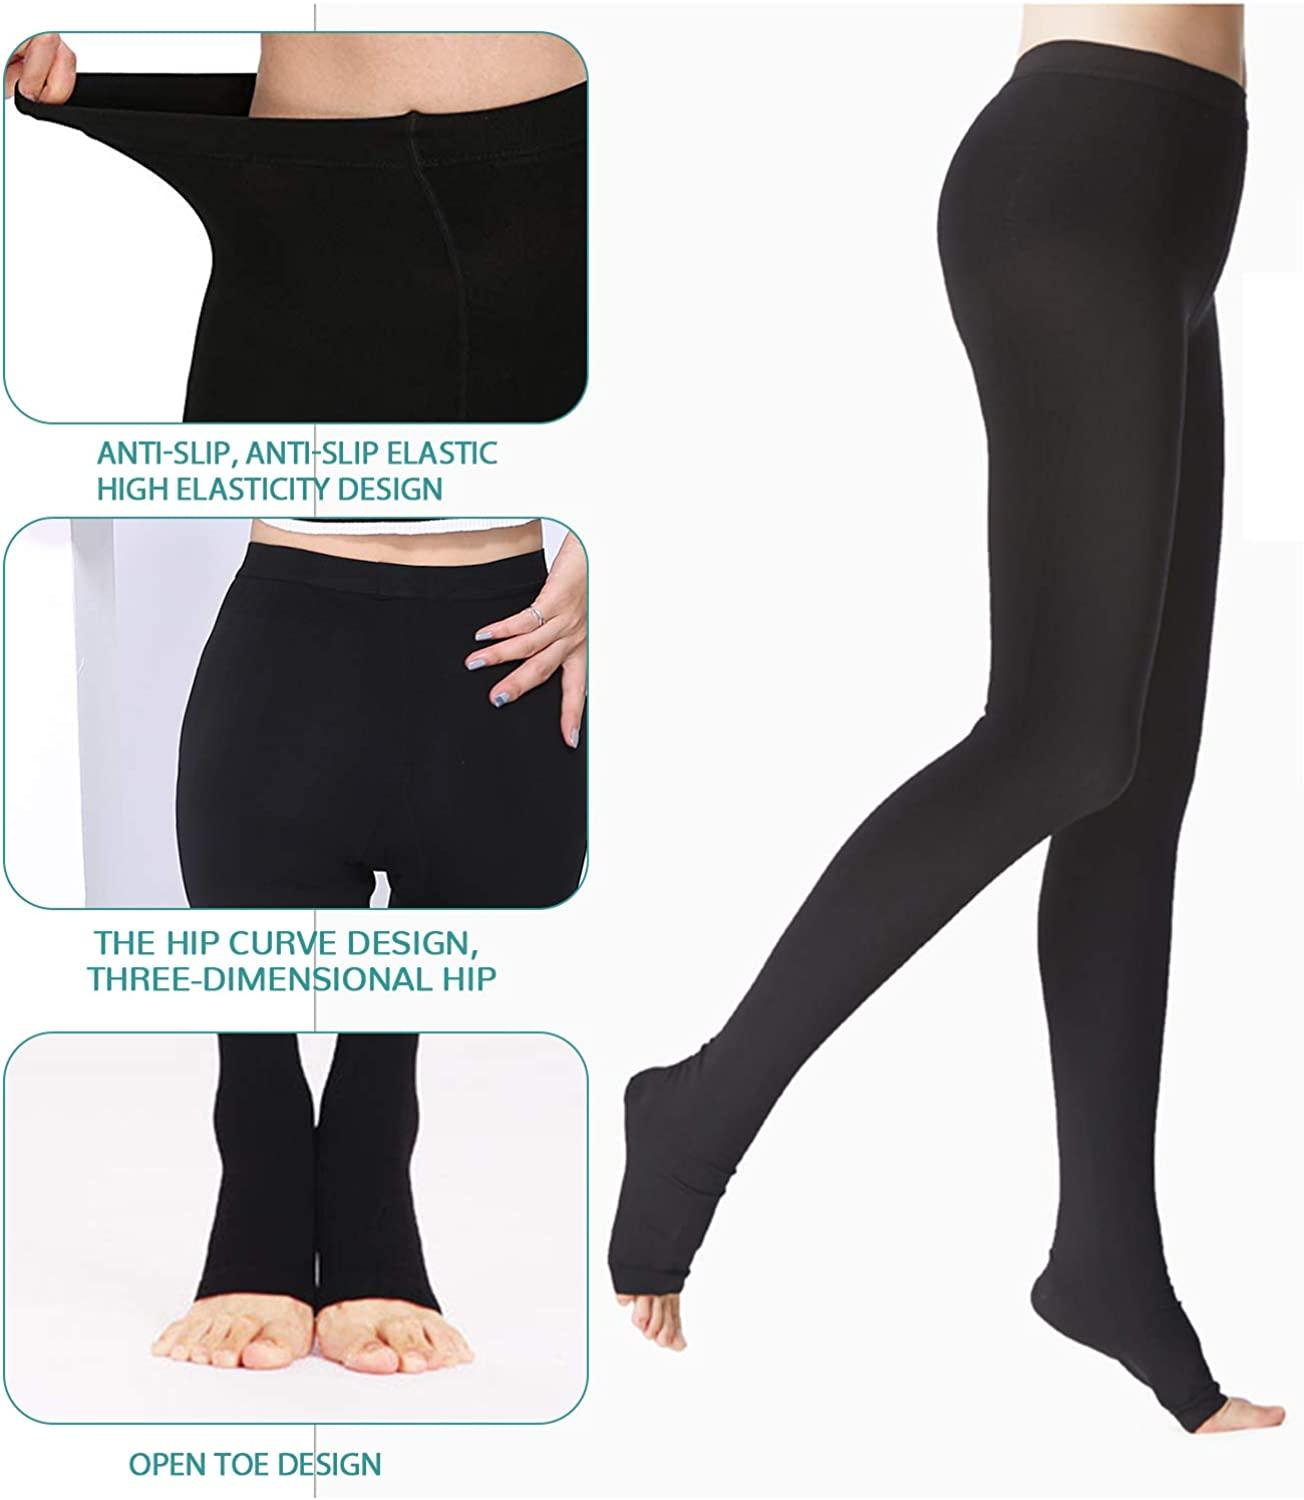 Medical Compression Pantyhose Stockings for Women Men - Plus Size Opaque  Support 20-30mmHg Firm Graduated Hose Tights, Treatment Swelling, Edema  Varicose Veins, Open Toe Black XL